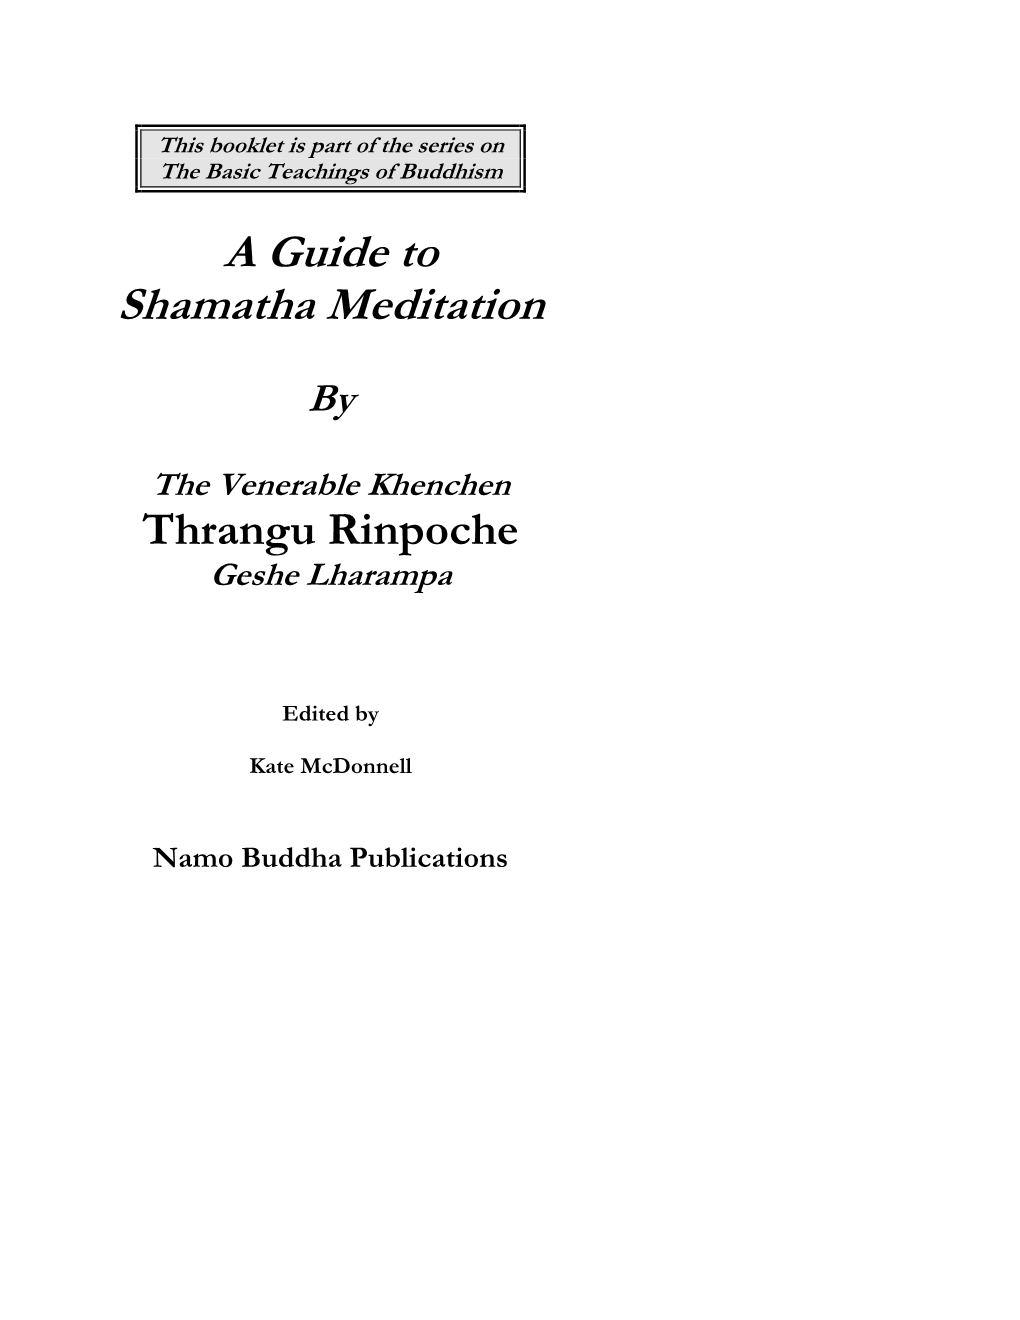 This Booklet Is Part of the Series on the Basic Teachings of Buddhism